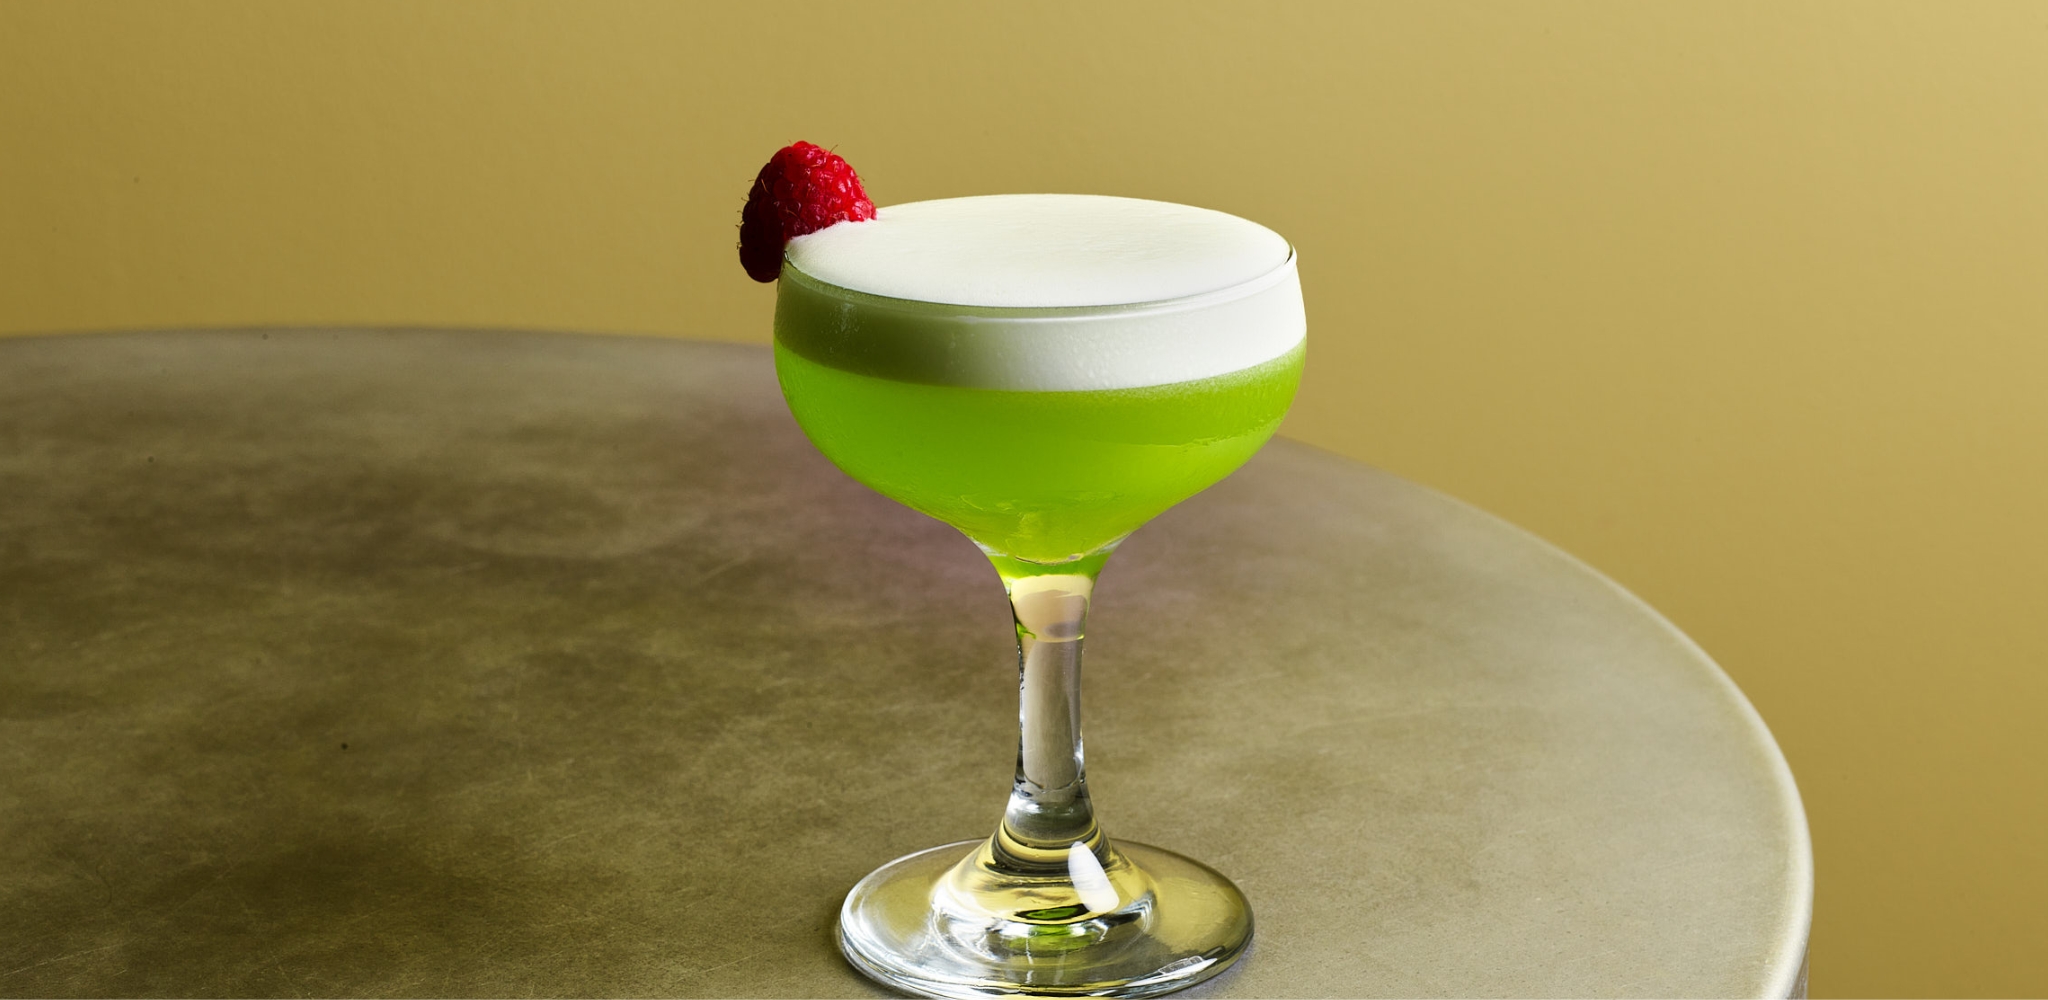 Image of the Jacksons Slipper cocktail with Ketel One Citroen, Midori, yuzu, lemon, whites with a raspberry on a stainless steel table.